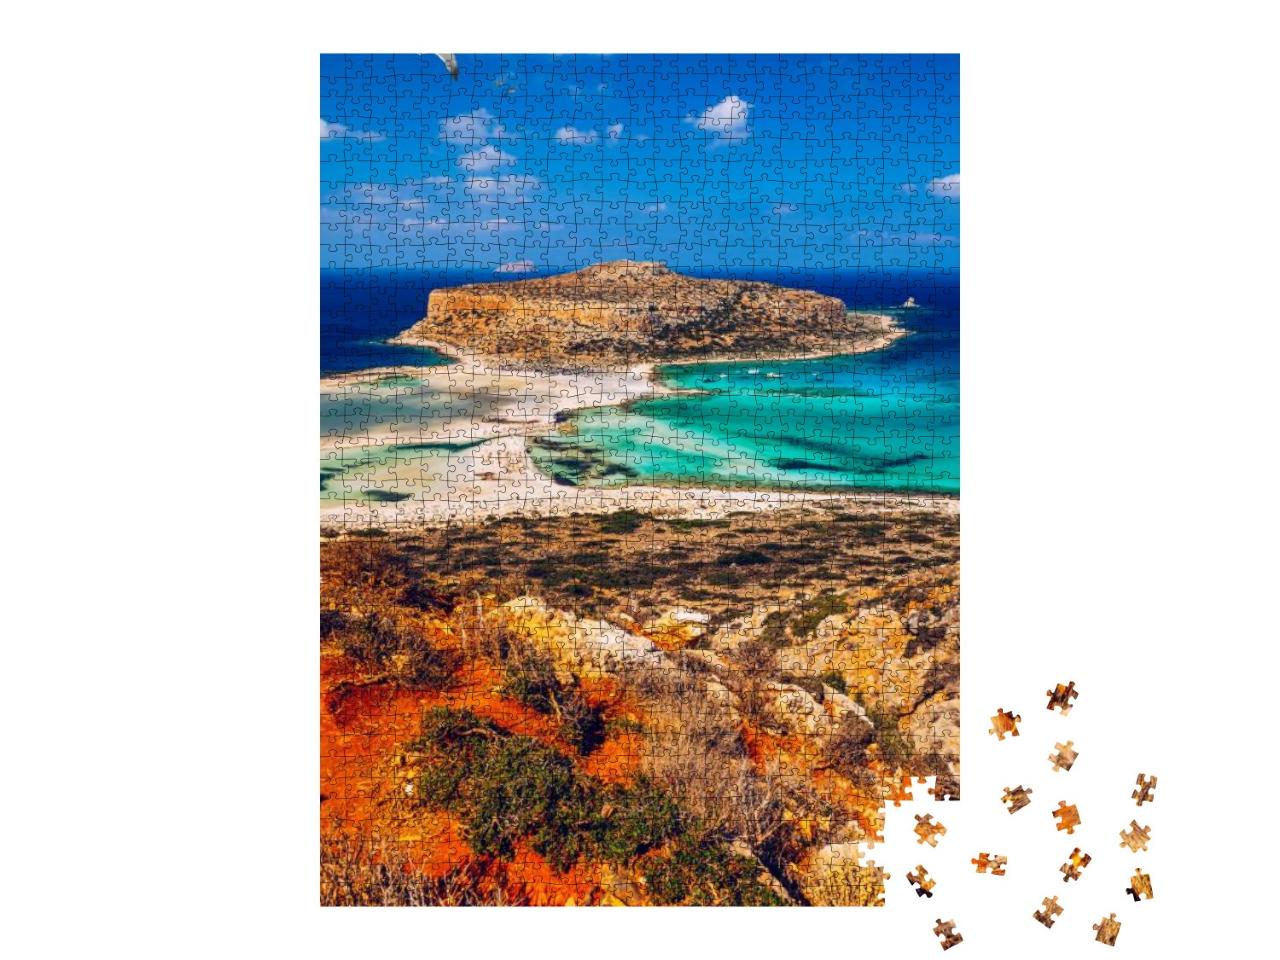 Balos Lagoon & GramvoUSA Island on Crete with Seagulls Fly... Jigsaw Puzzle with 1000 pieces